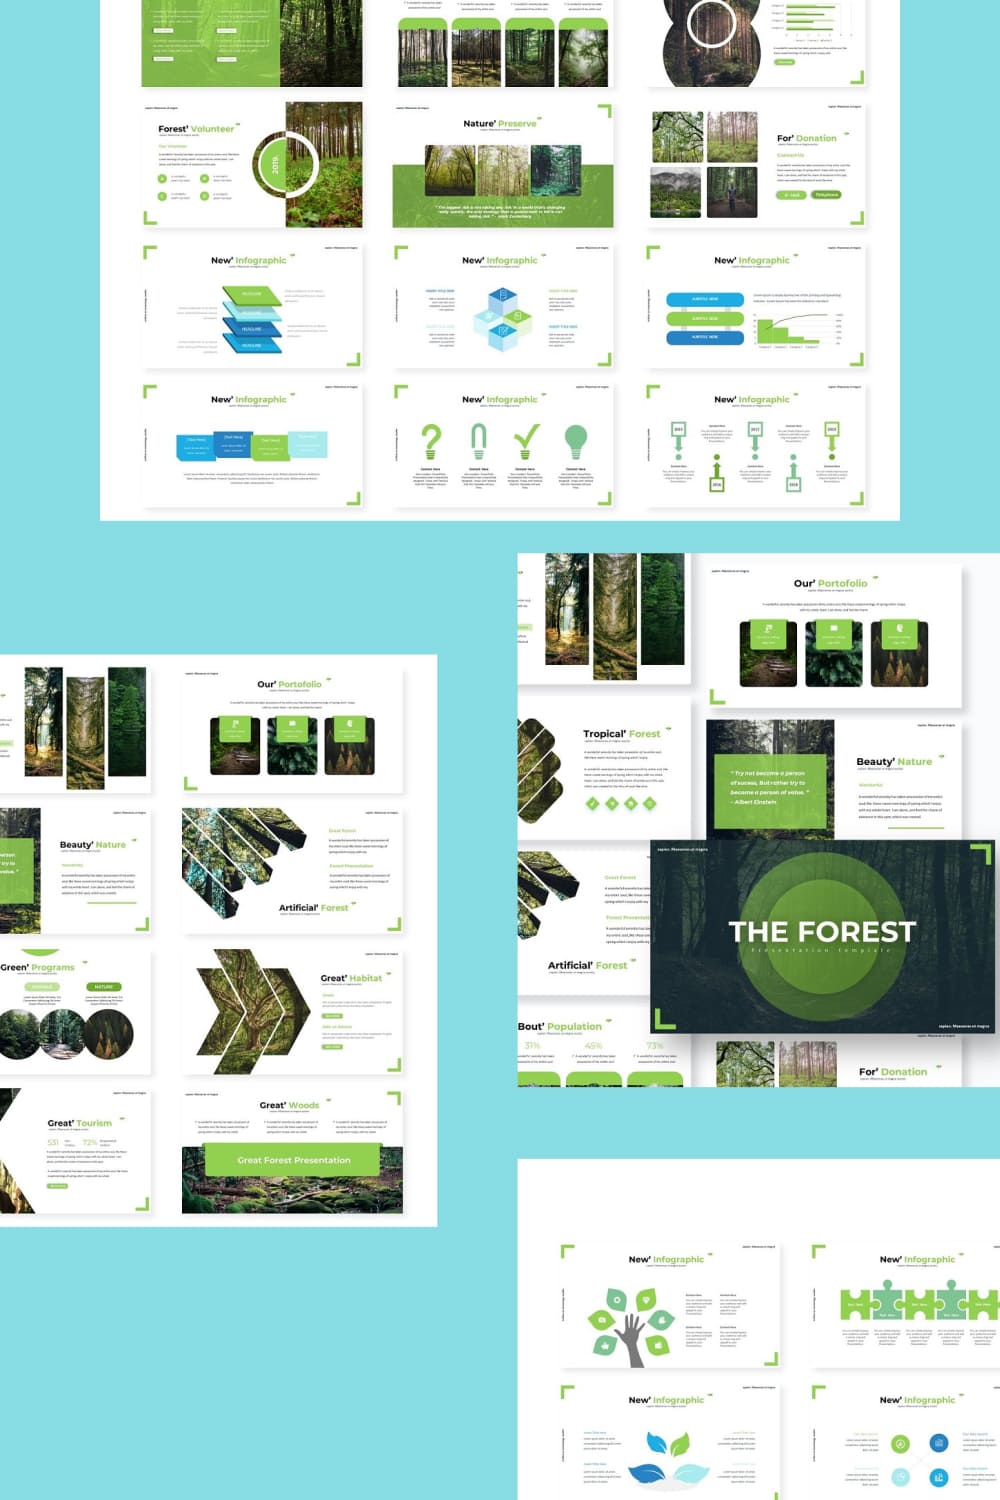 The Forest - Google Slides Template.